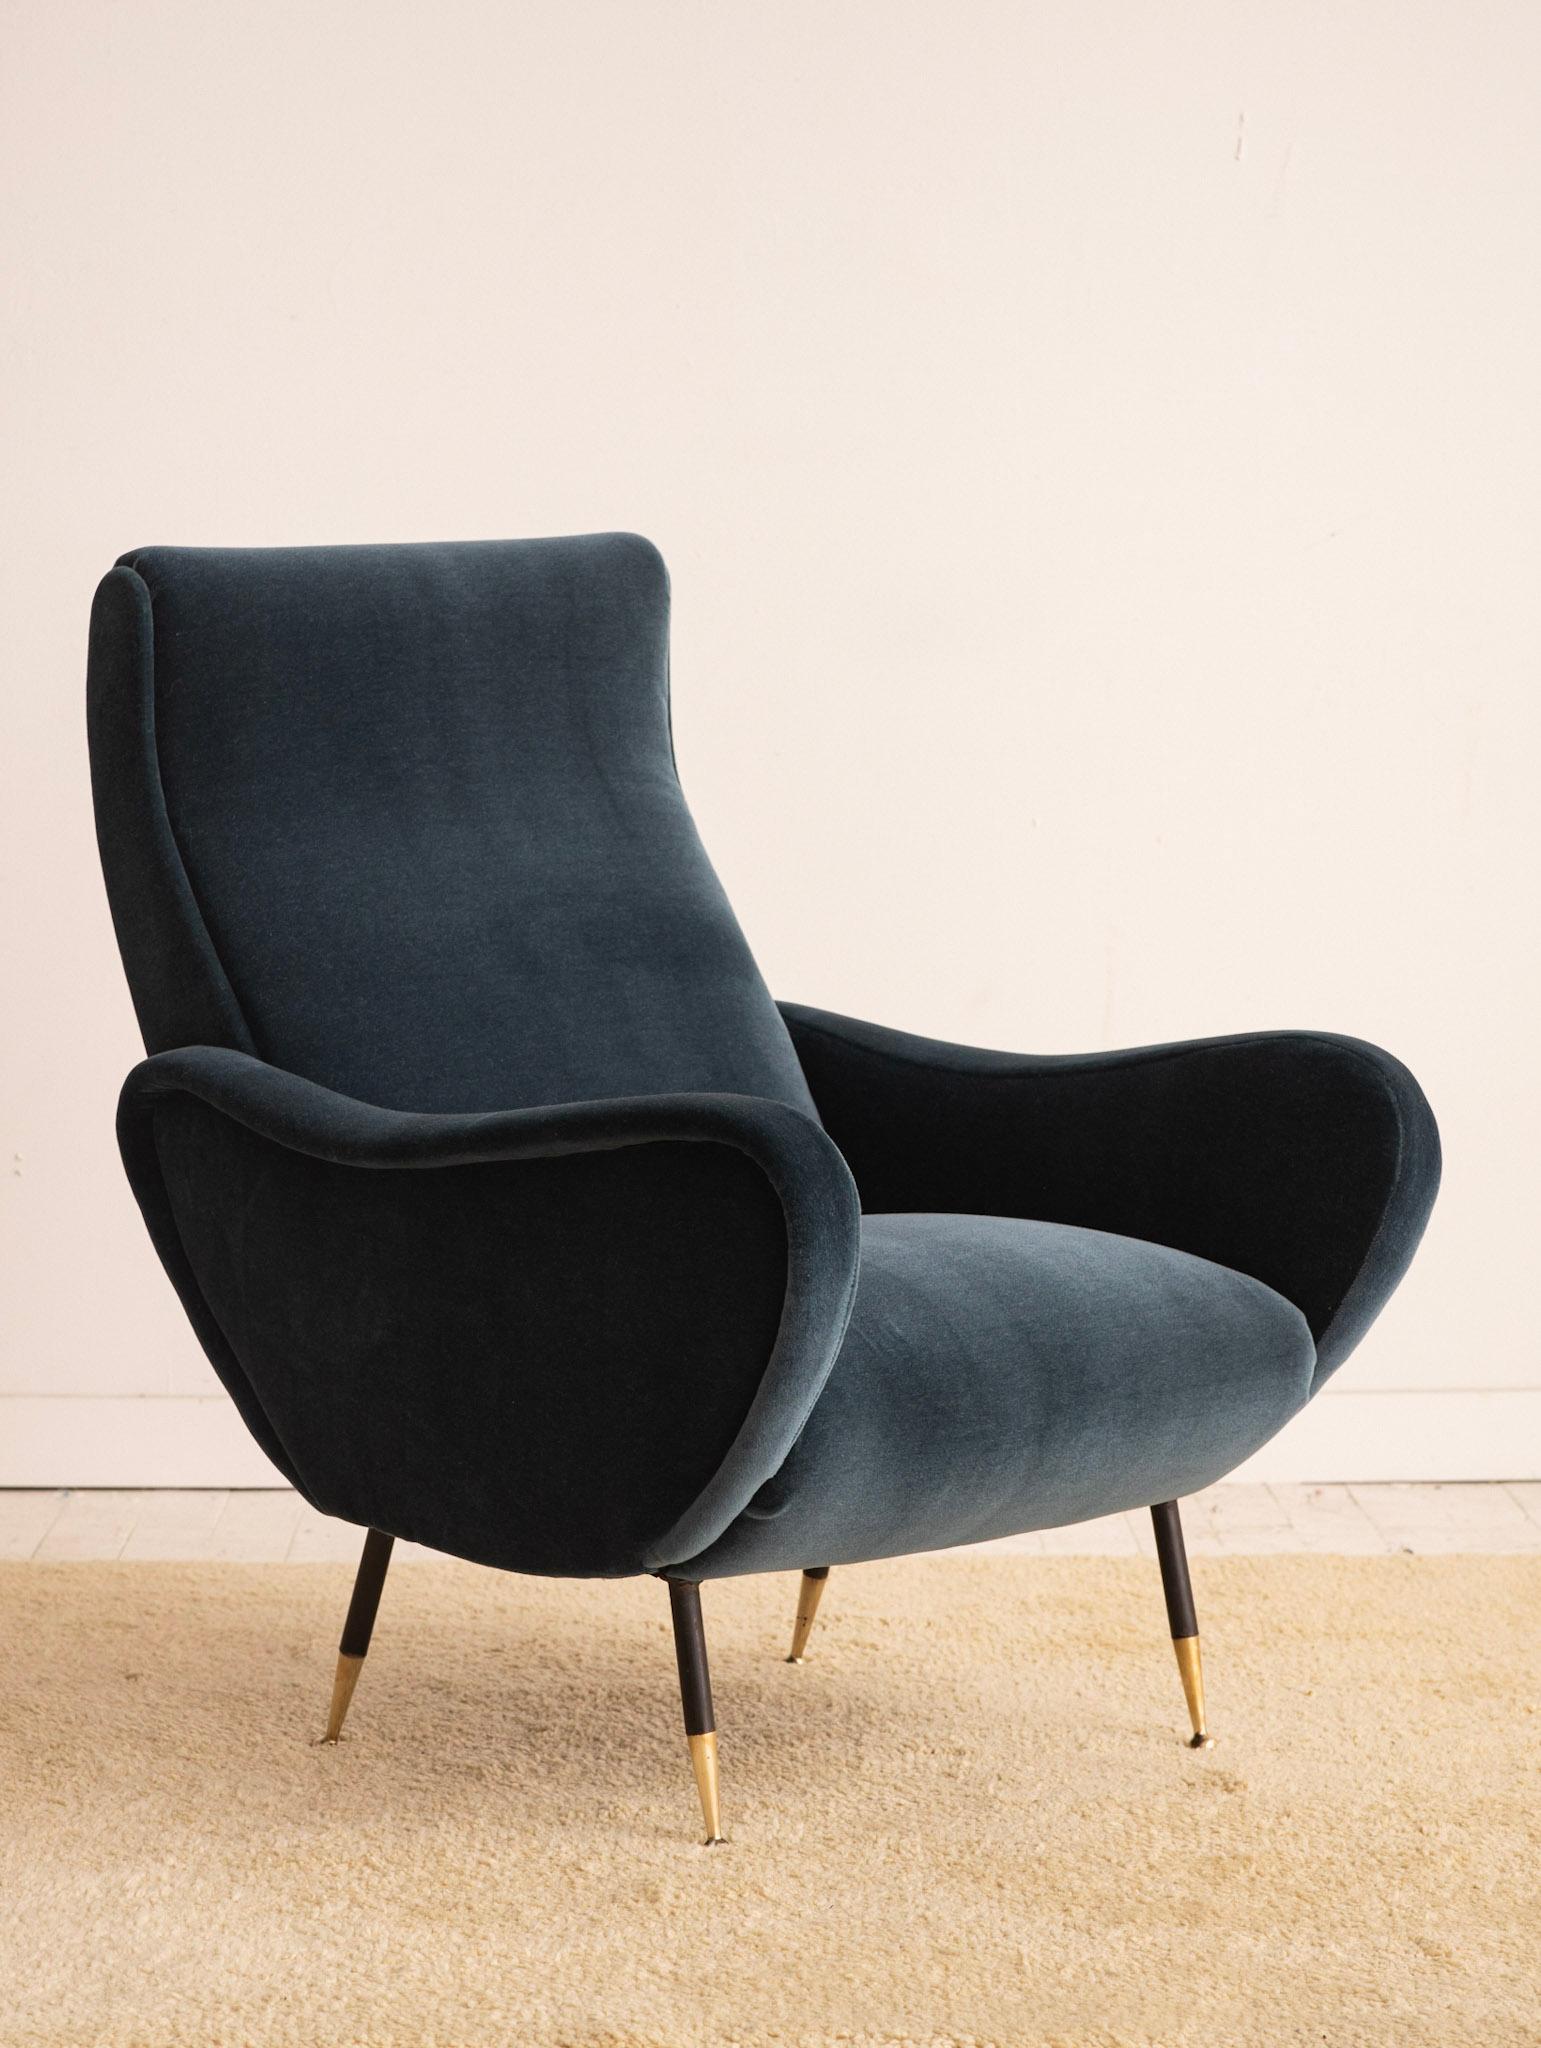 Mid-century Italian lounge chair in the style of Marco Zanuso. Sculptural silhouette with brass feet. Newly reupholstered in dark teal mohair. Sourced outside of Florence Italy.